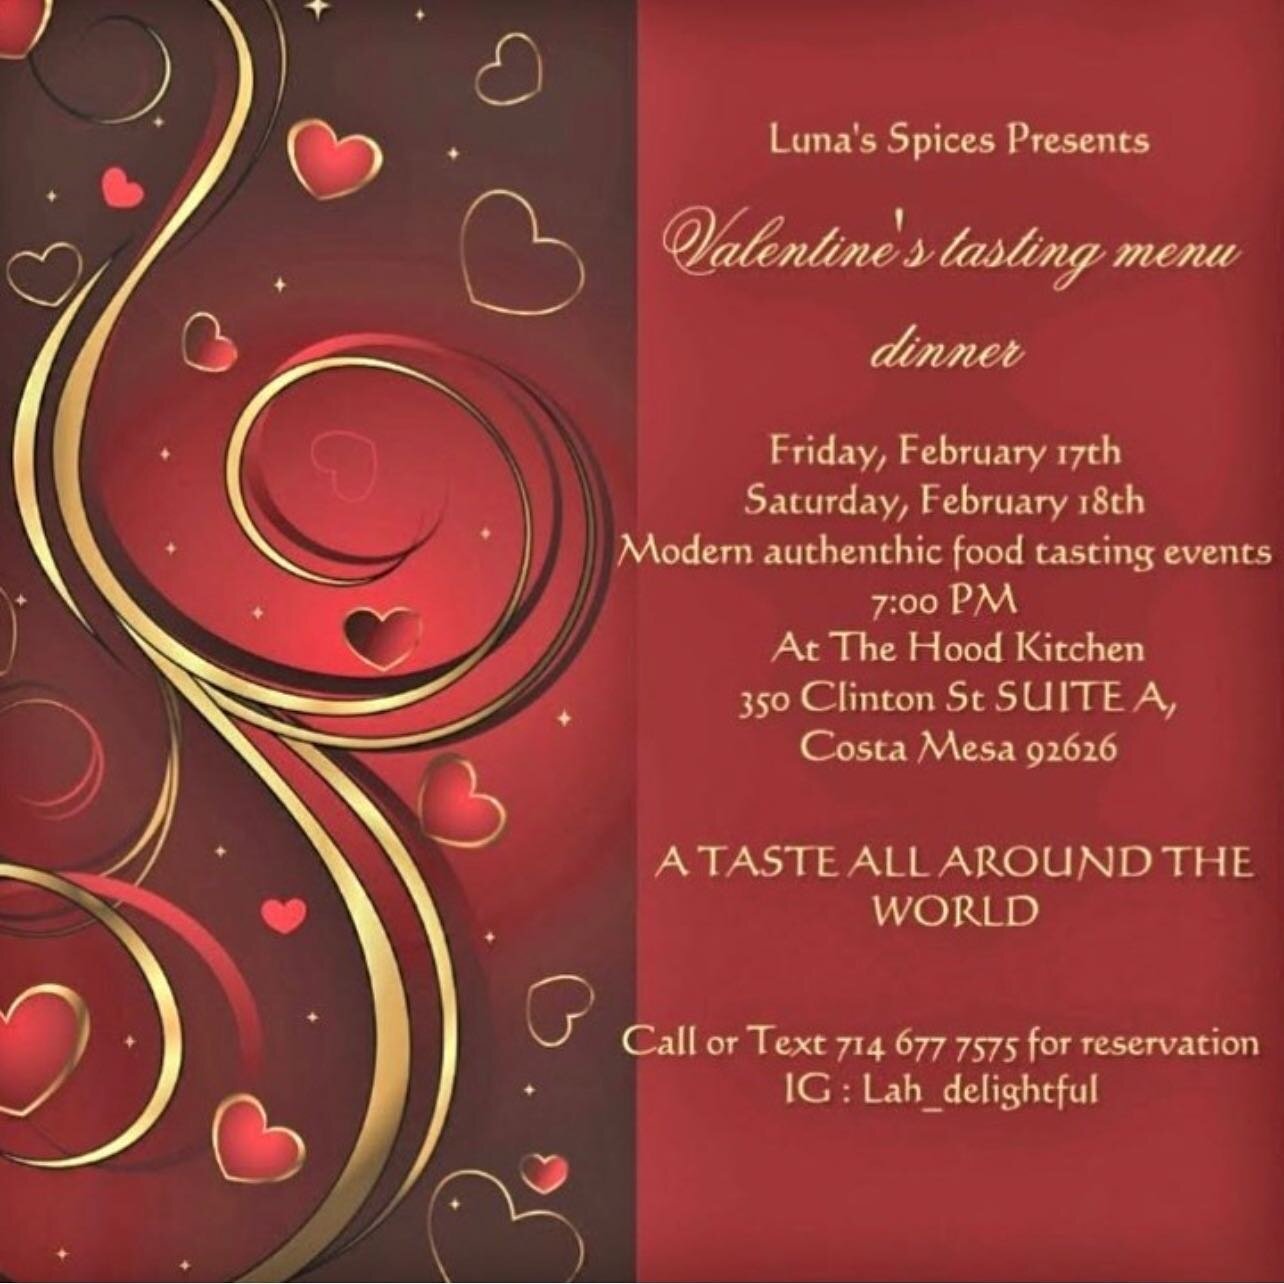 Looking for a special dinner plan for your favorite loved one for  Valentine&rsquo;s weekend? ✨&hearts;️

Join Luna Spices Valentine&rsquo;s Tasting Menu at the Hood Kitchen!

Call or text to reserve your spot!

#lunaspices #thehoodkitchen #costamesa